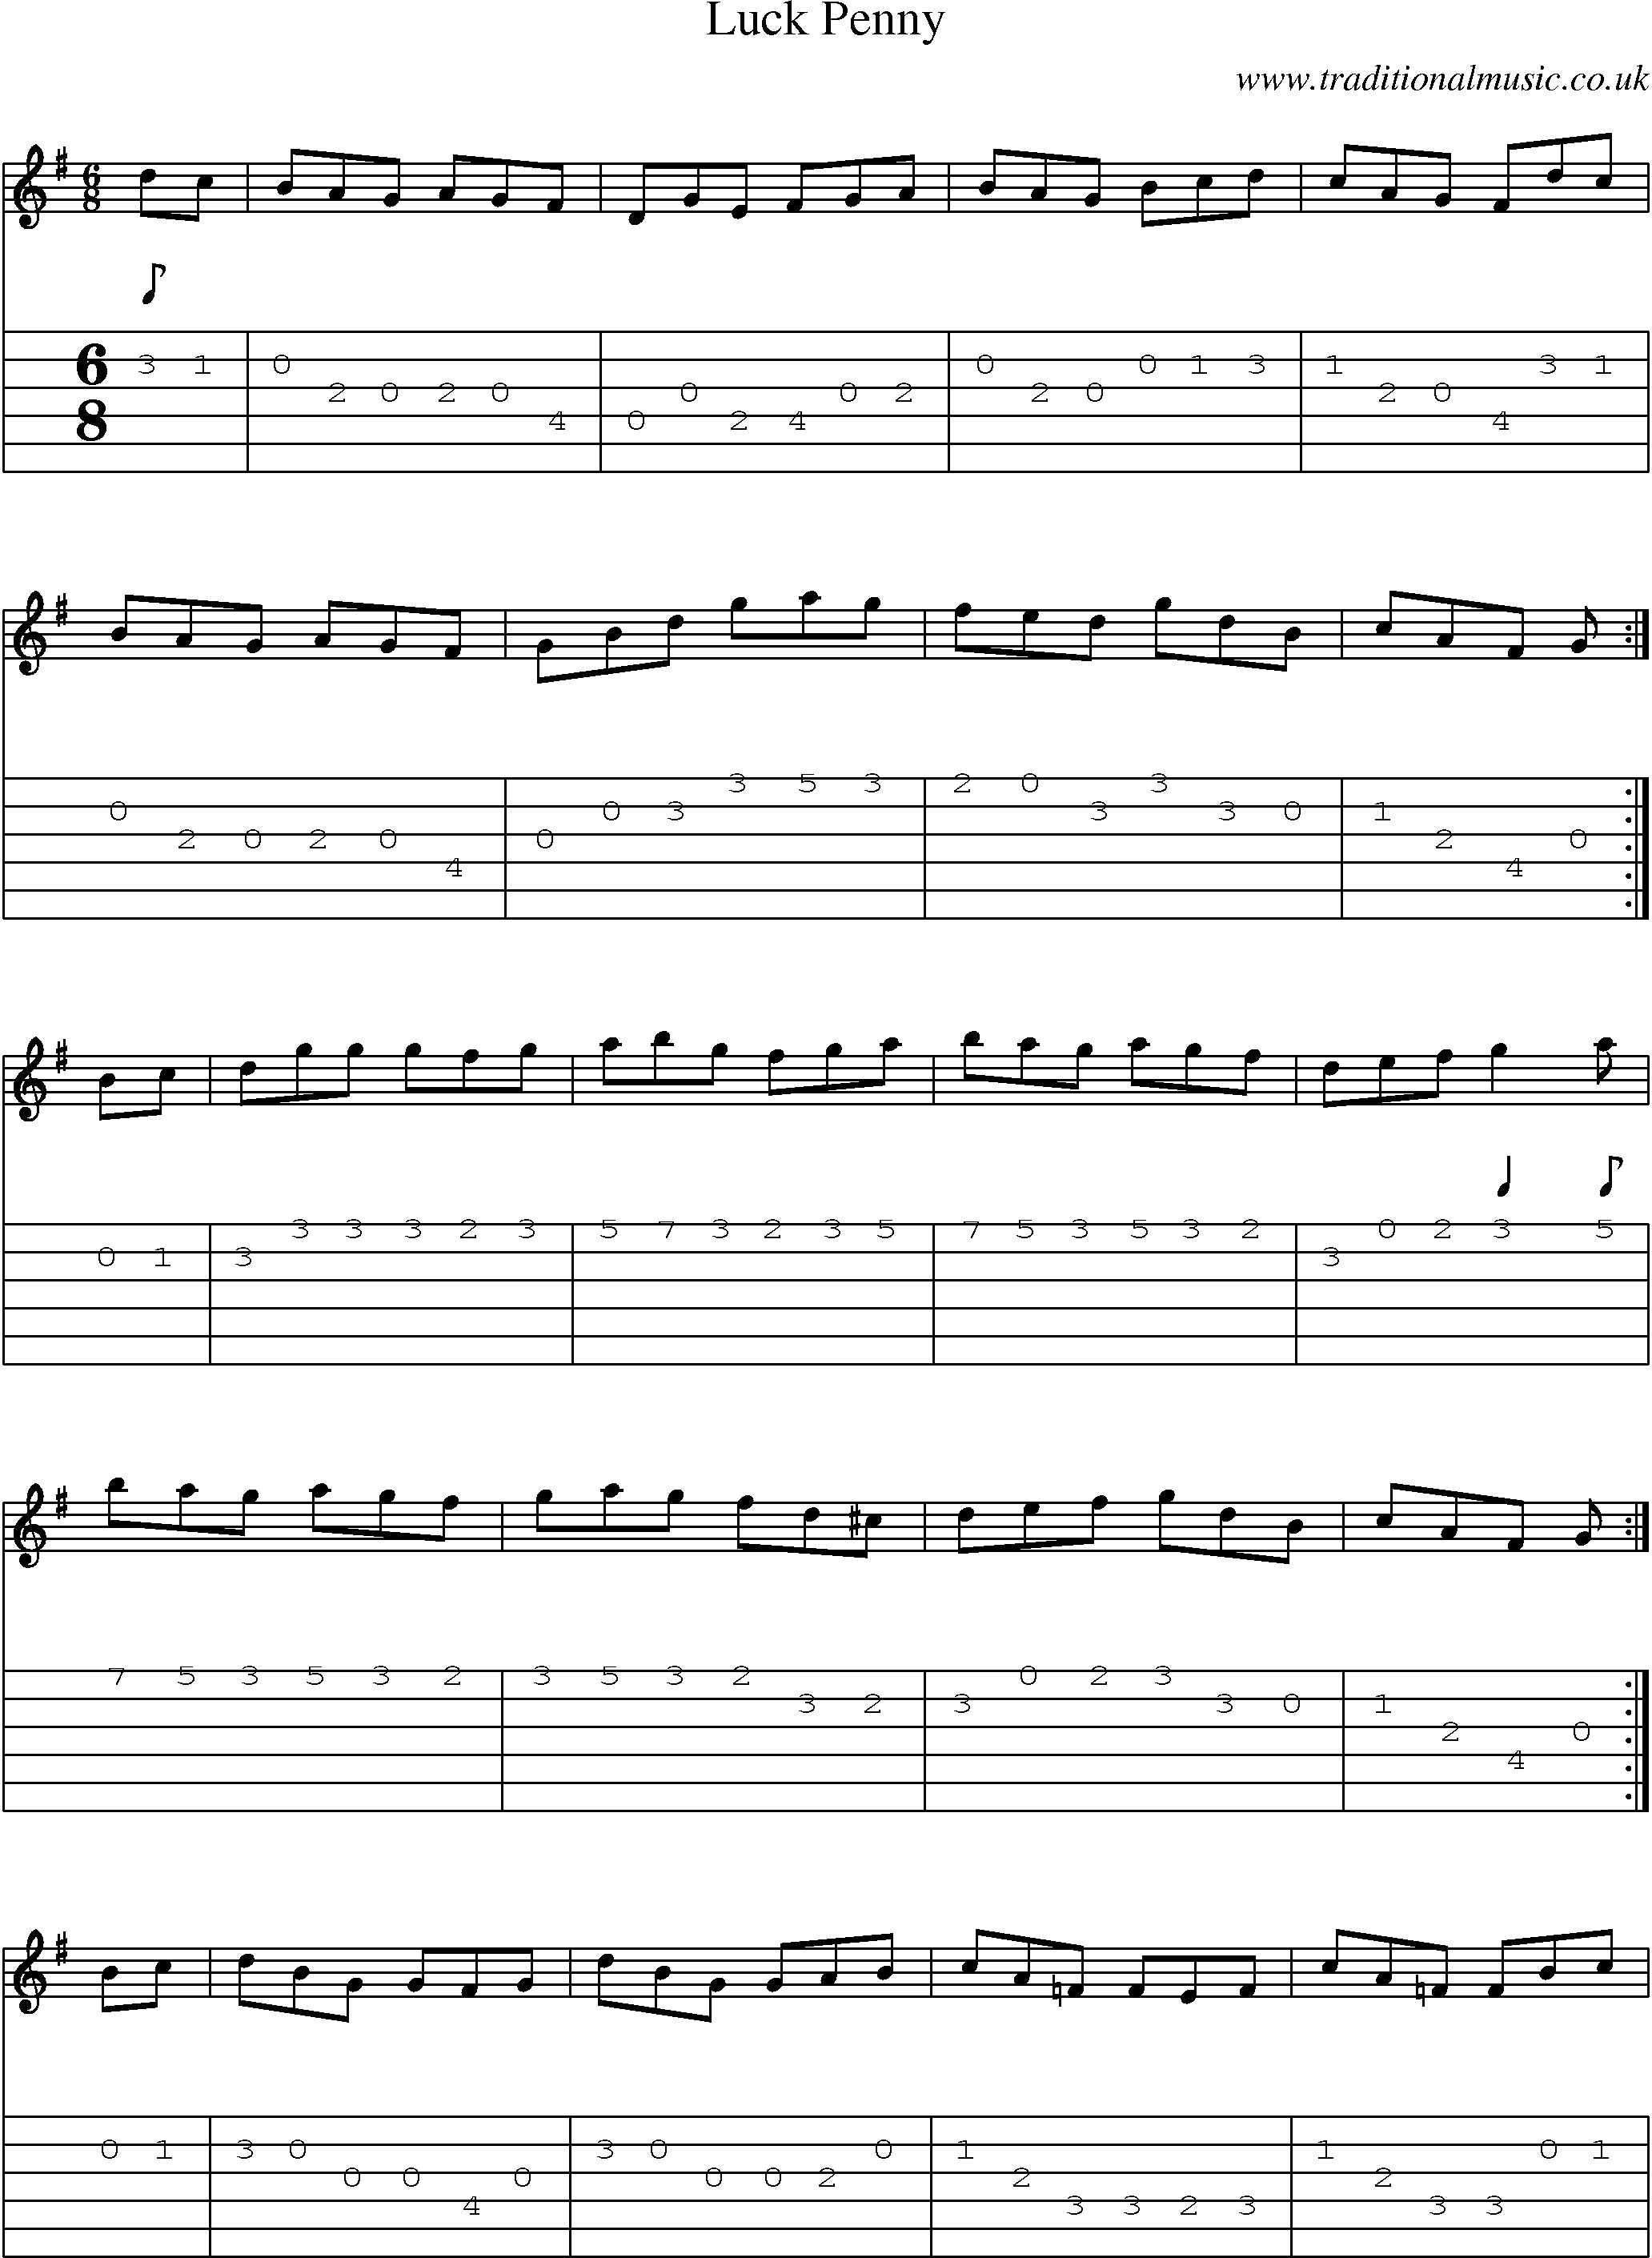 Music Score and Guitar Tabs for Luck Penny